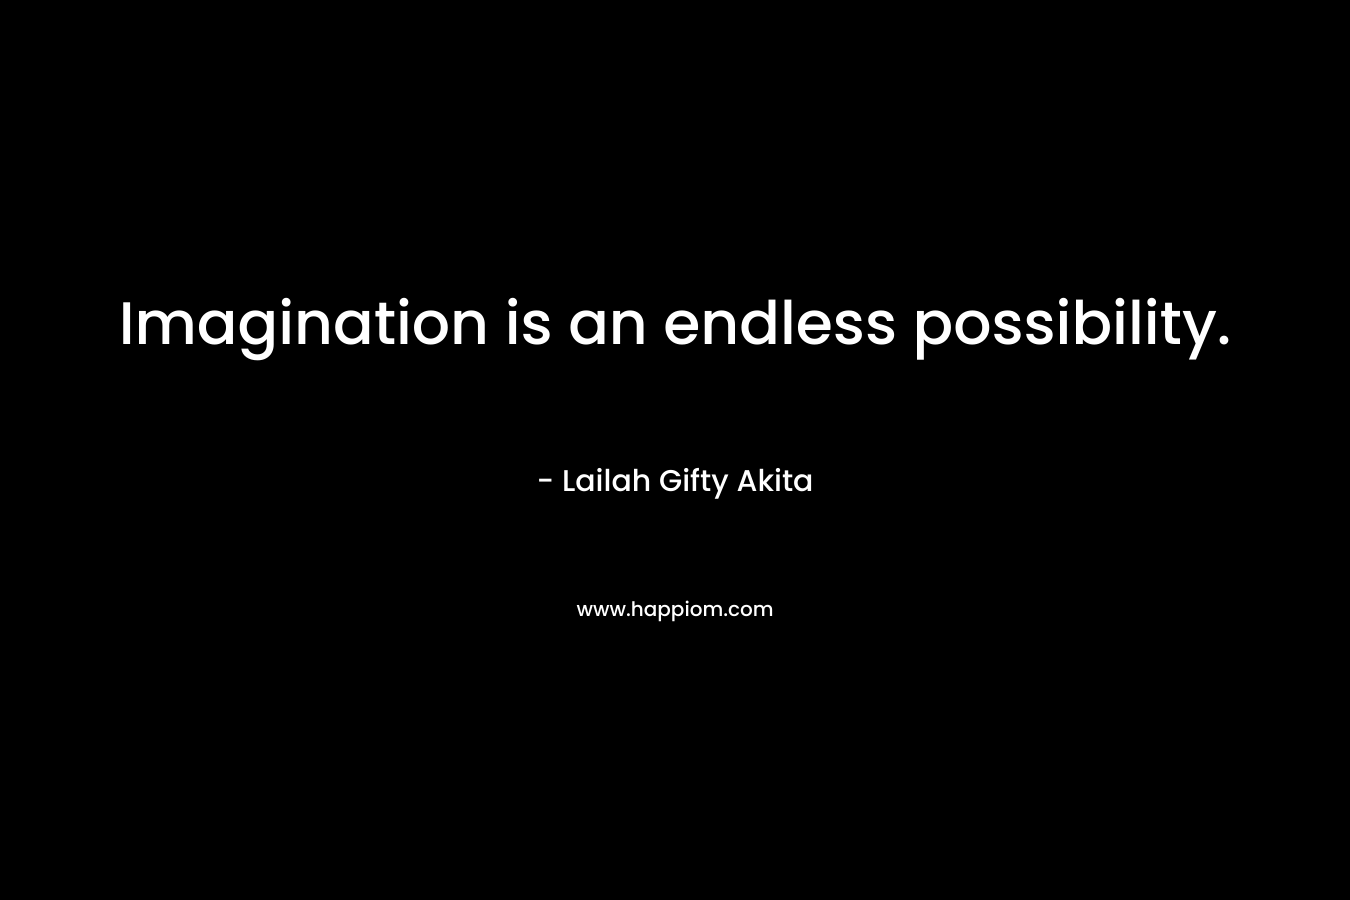 Imagination is an endless possibility.